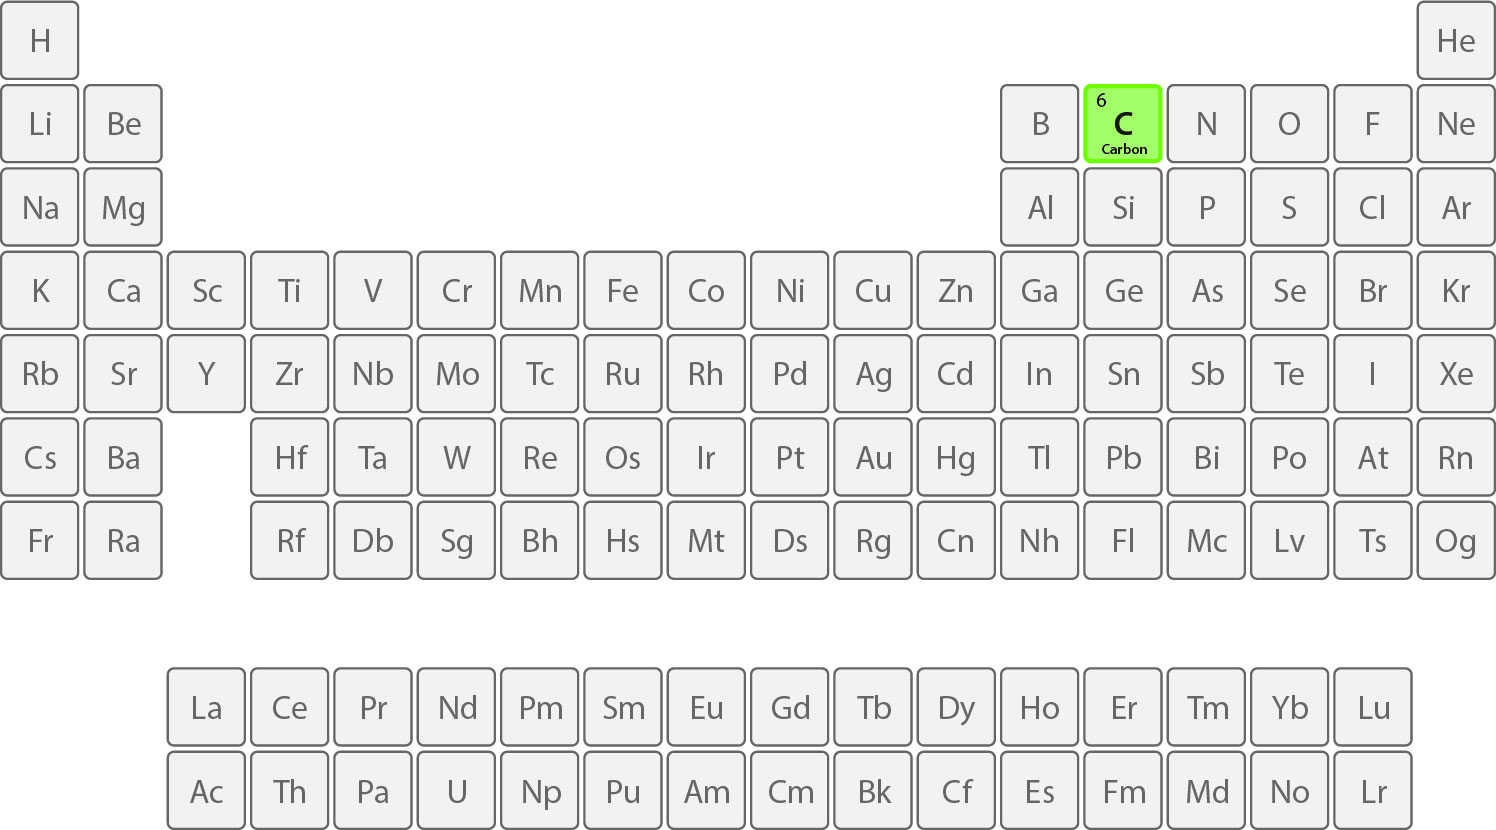 Carbon on the periodic table